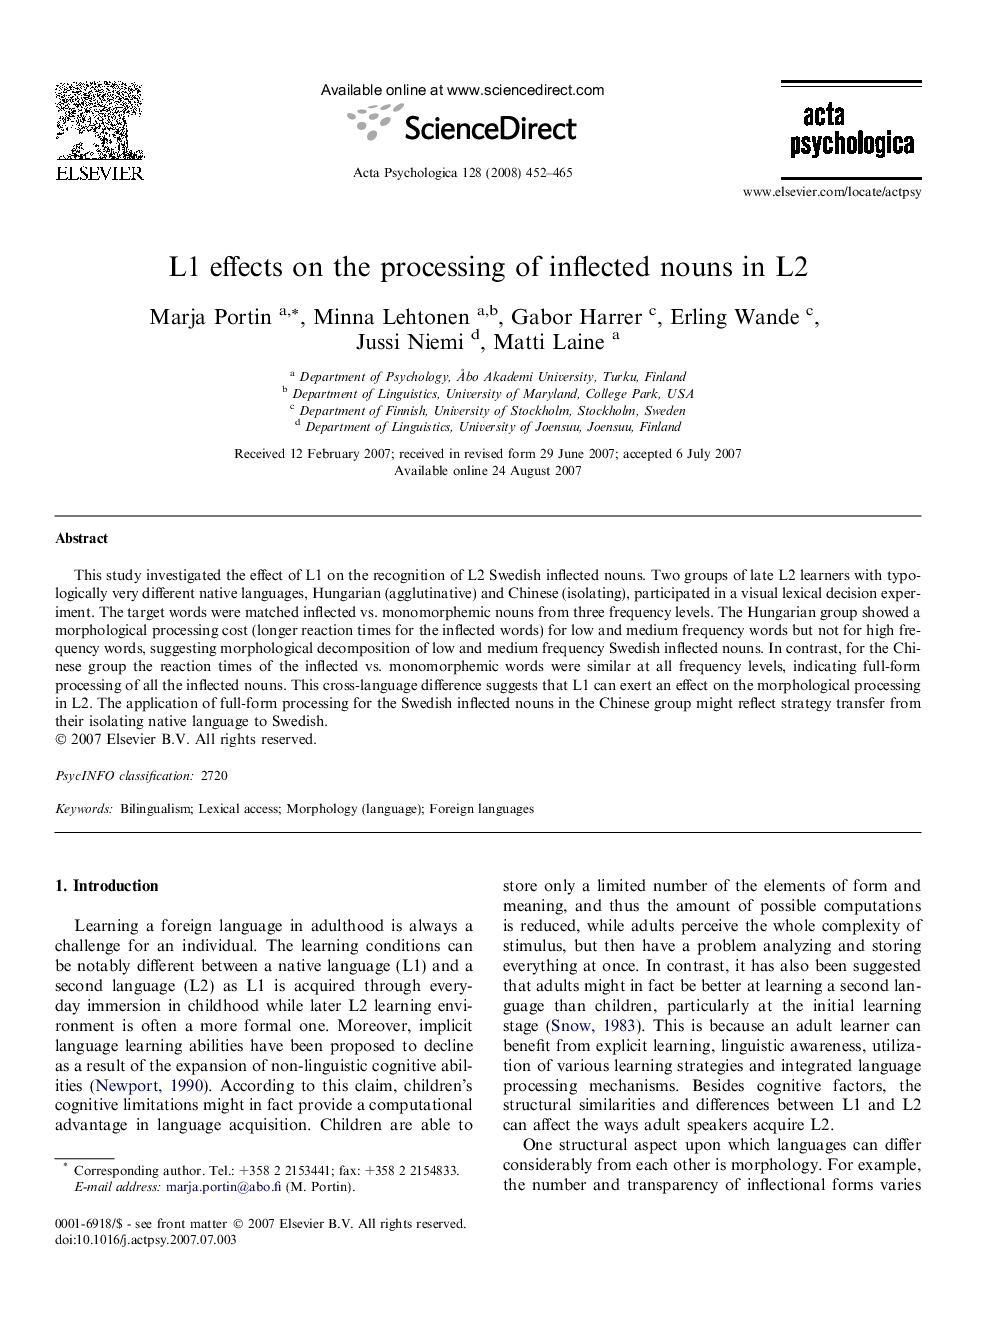 L1 effects on the processing of inflected nouns in L2